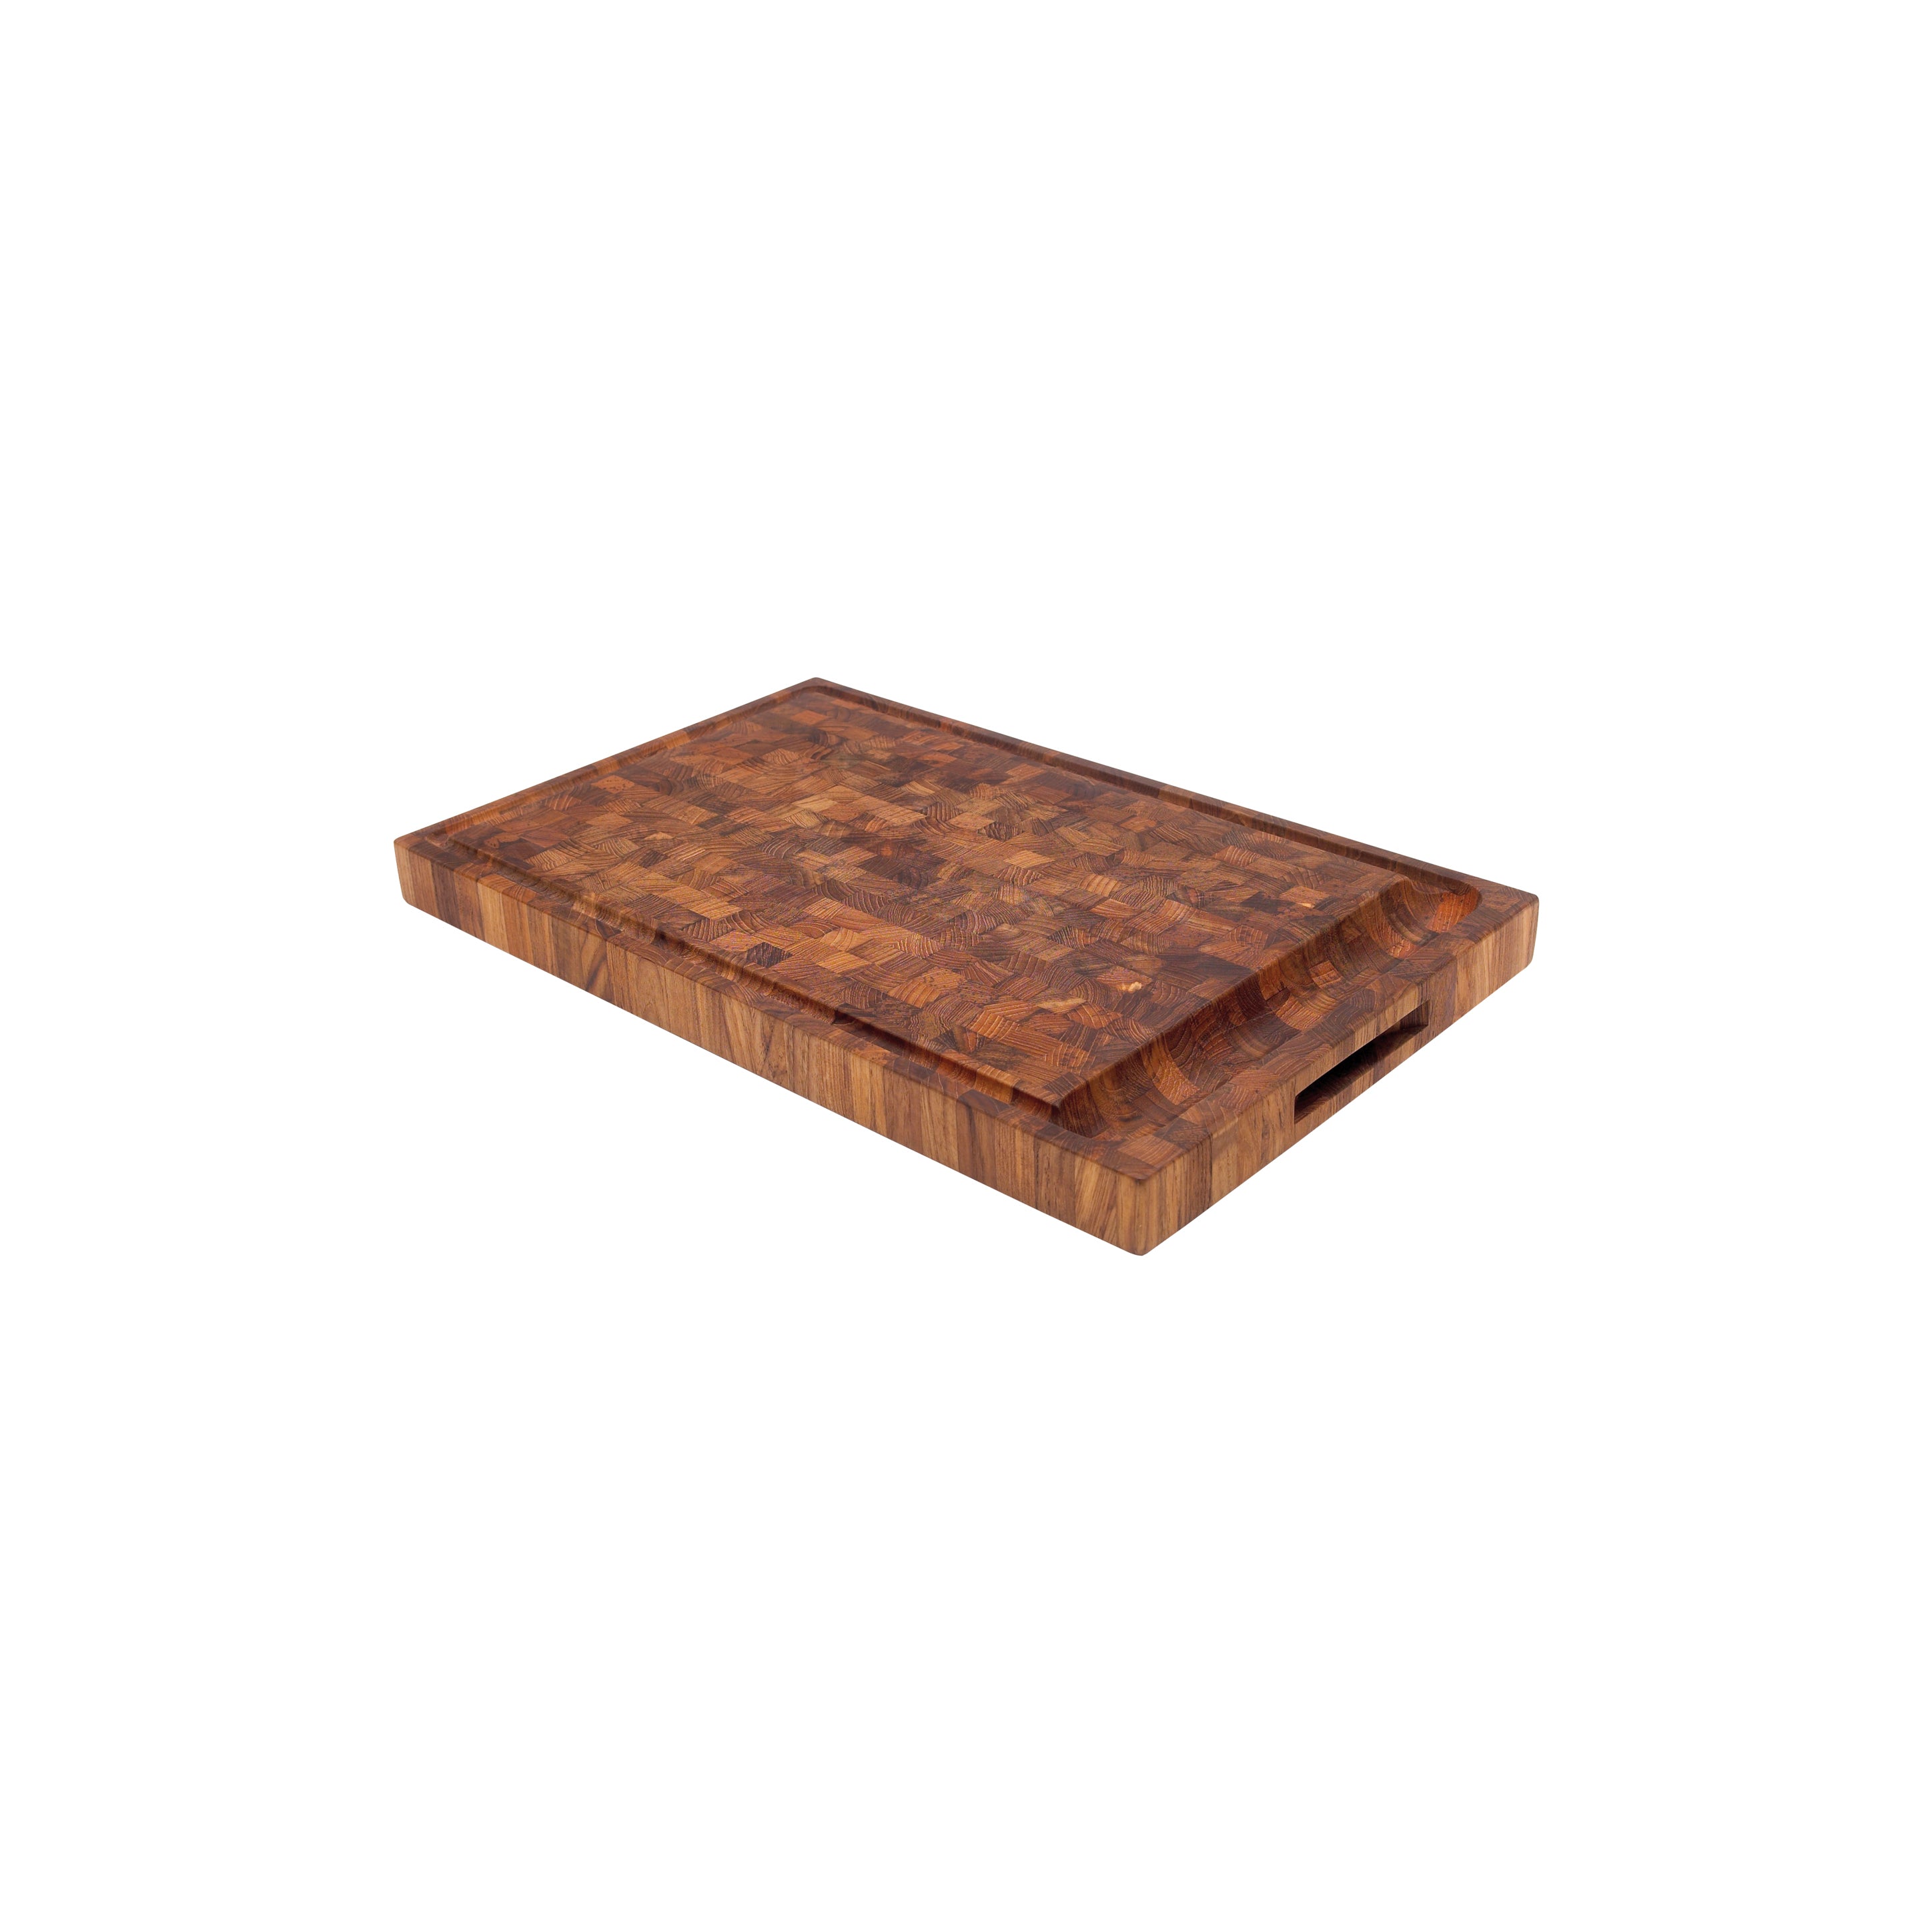 Walnut Cutting Board heritage for Rustic Kitchen, Wooden